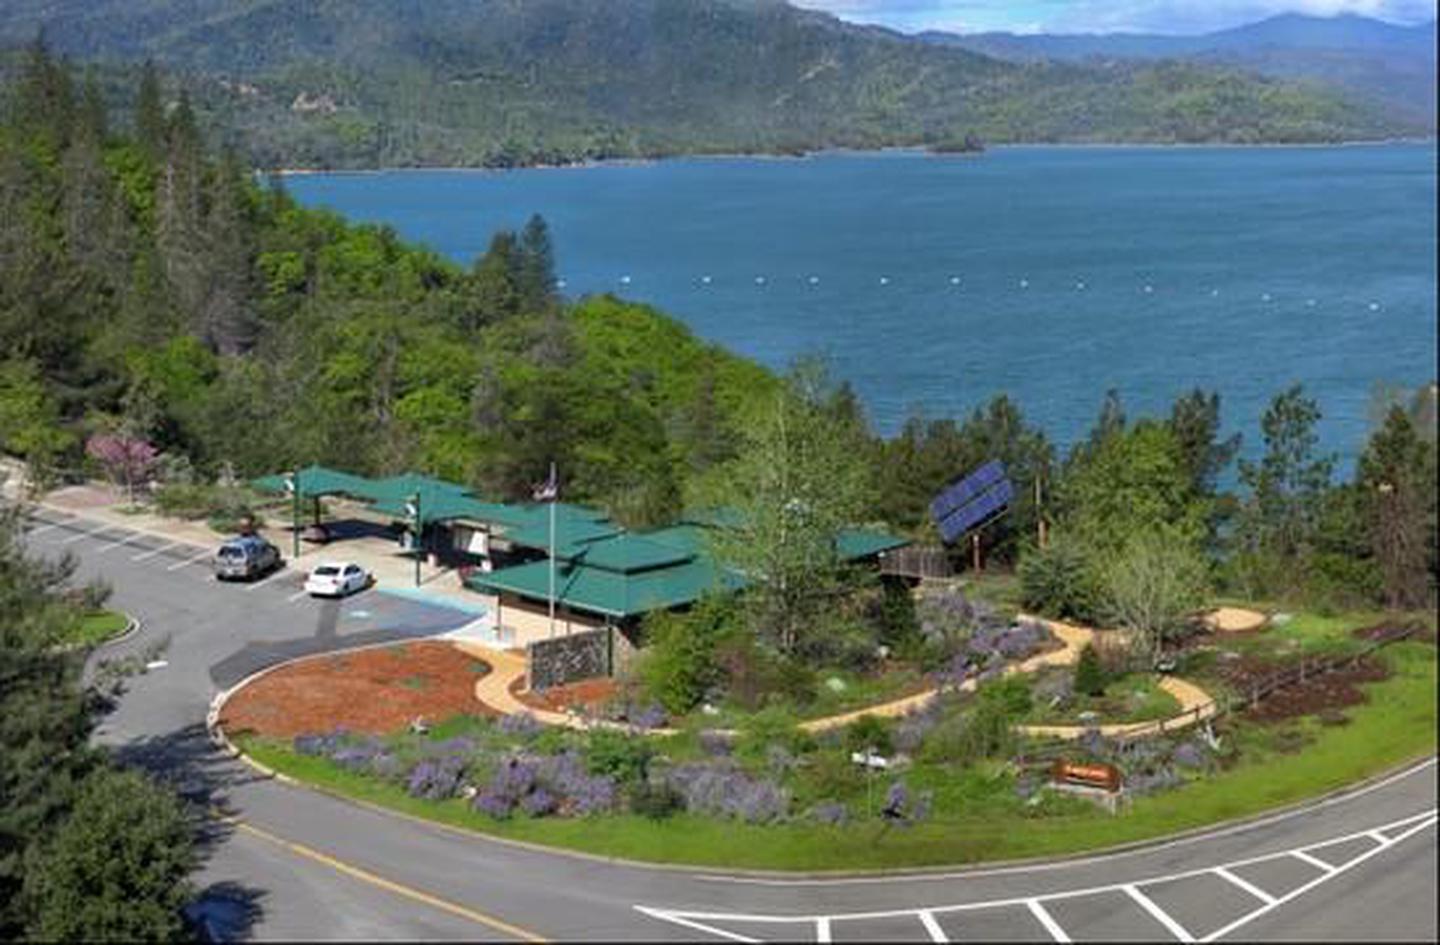 Preview photo of Whiskeytown Visitor Center